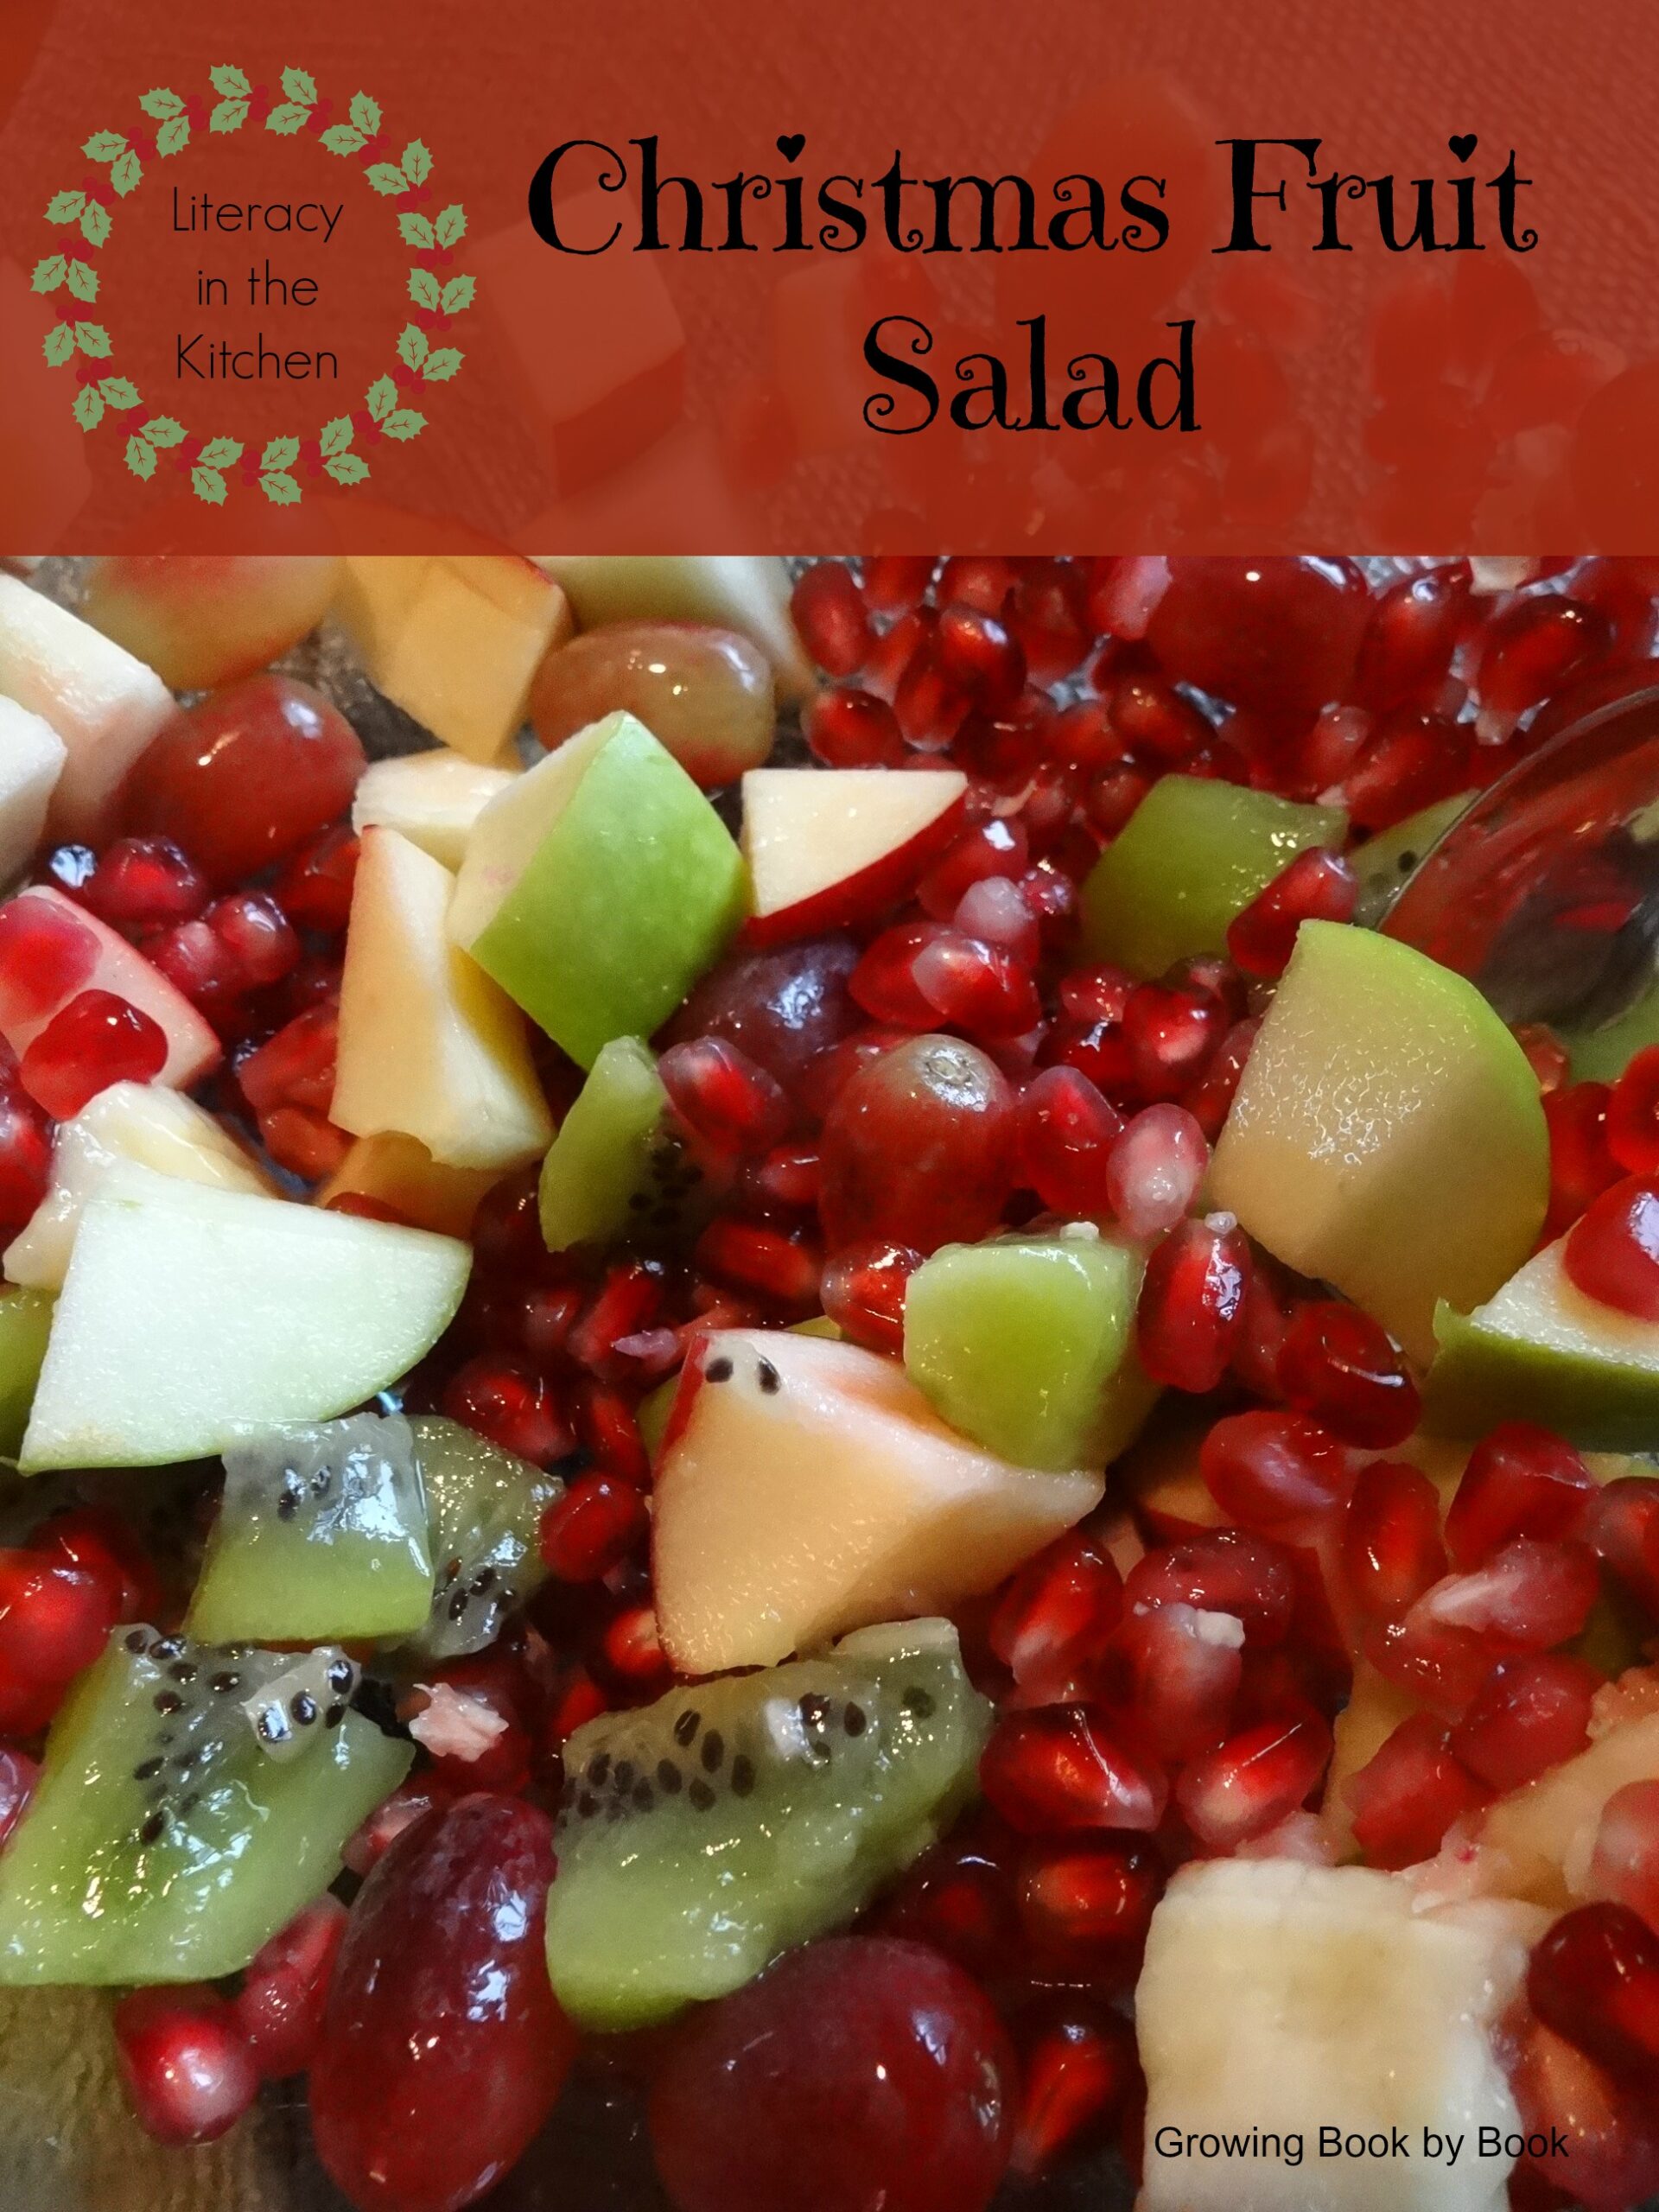 A delicious Christmas fruit salad recipe that can be made with the kids and some fun learning ideas to go along with the fun!